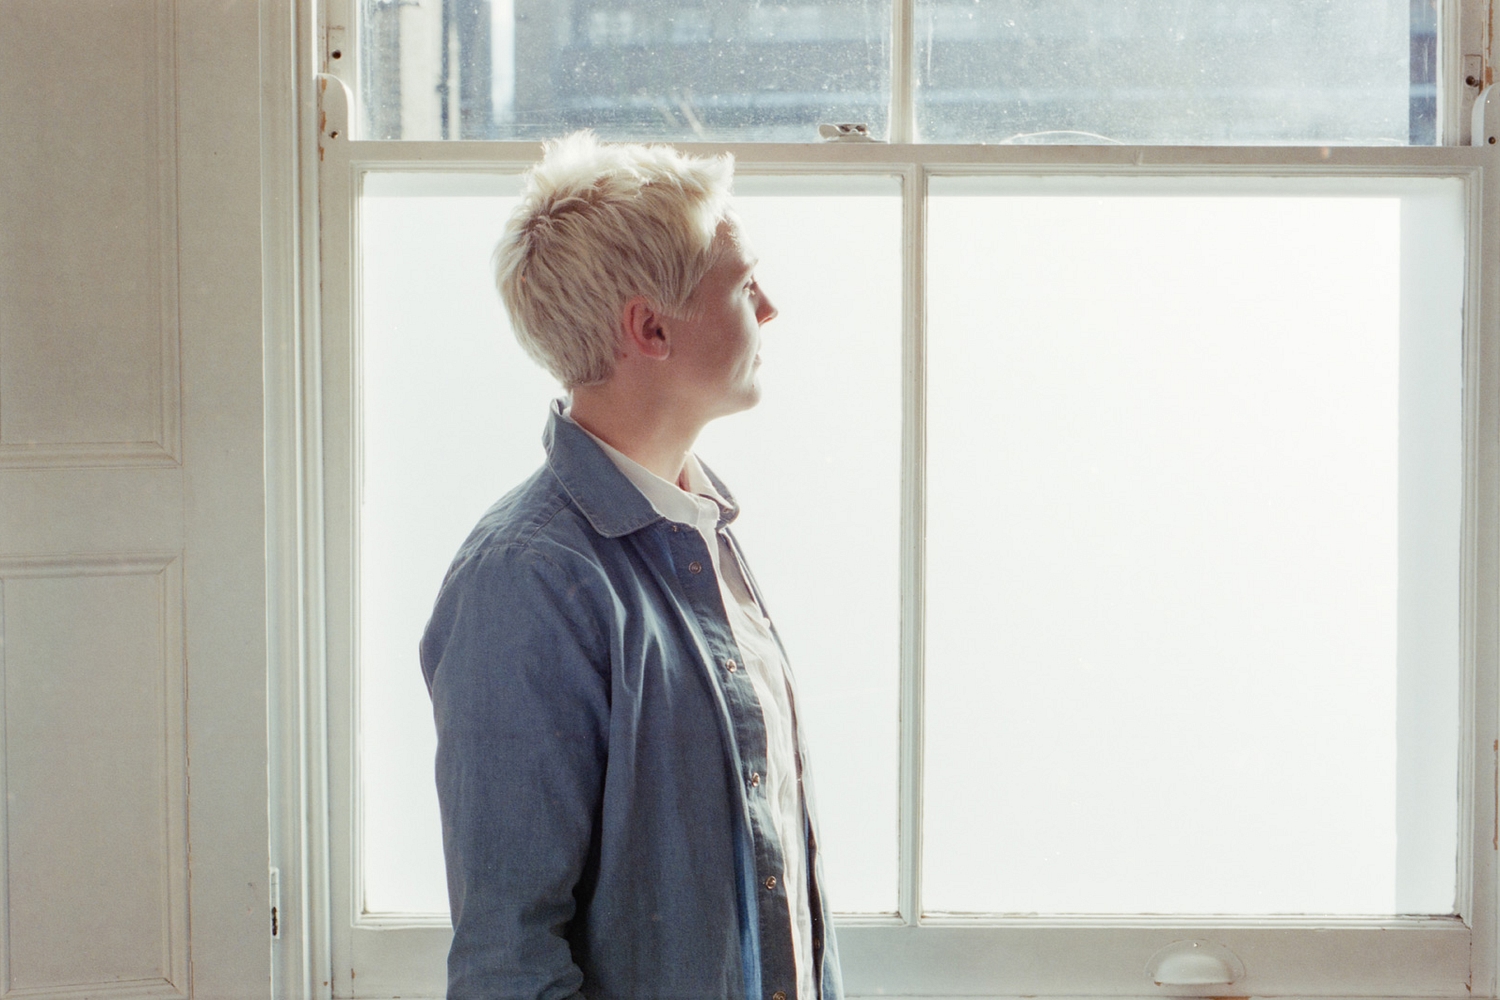 Laura Marling streams ‘I Feel Your Love’ track from new album